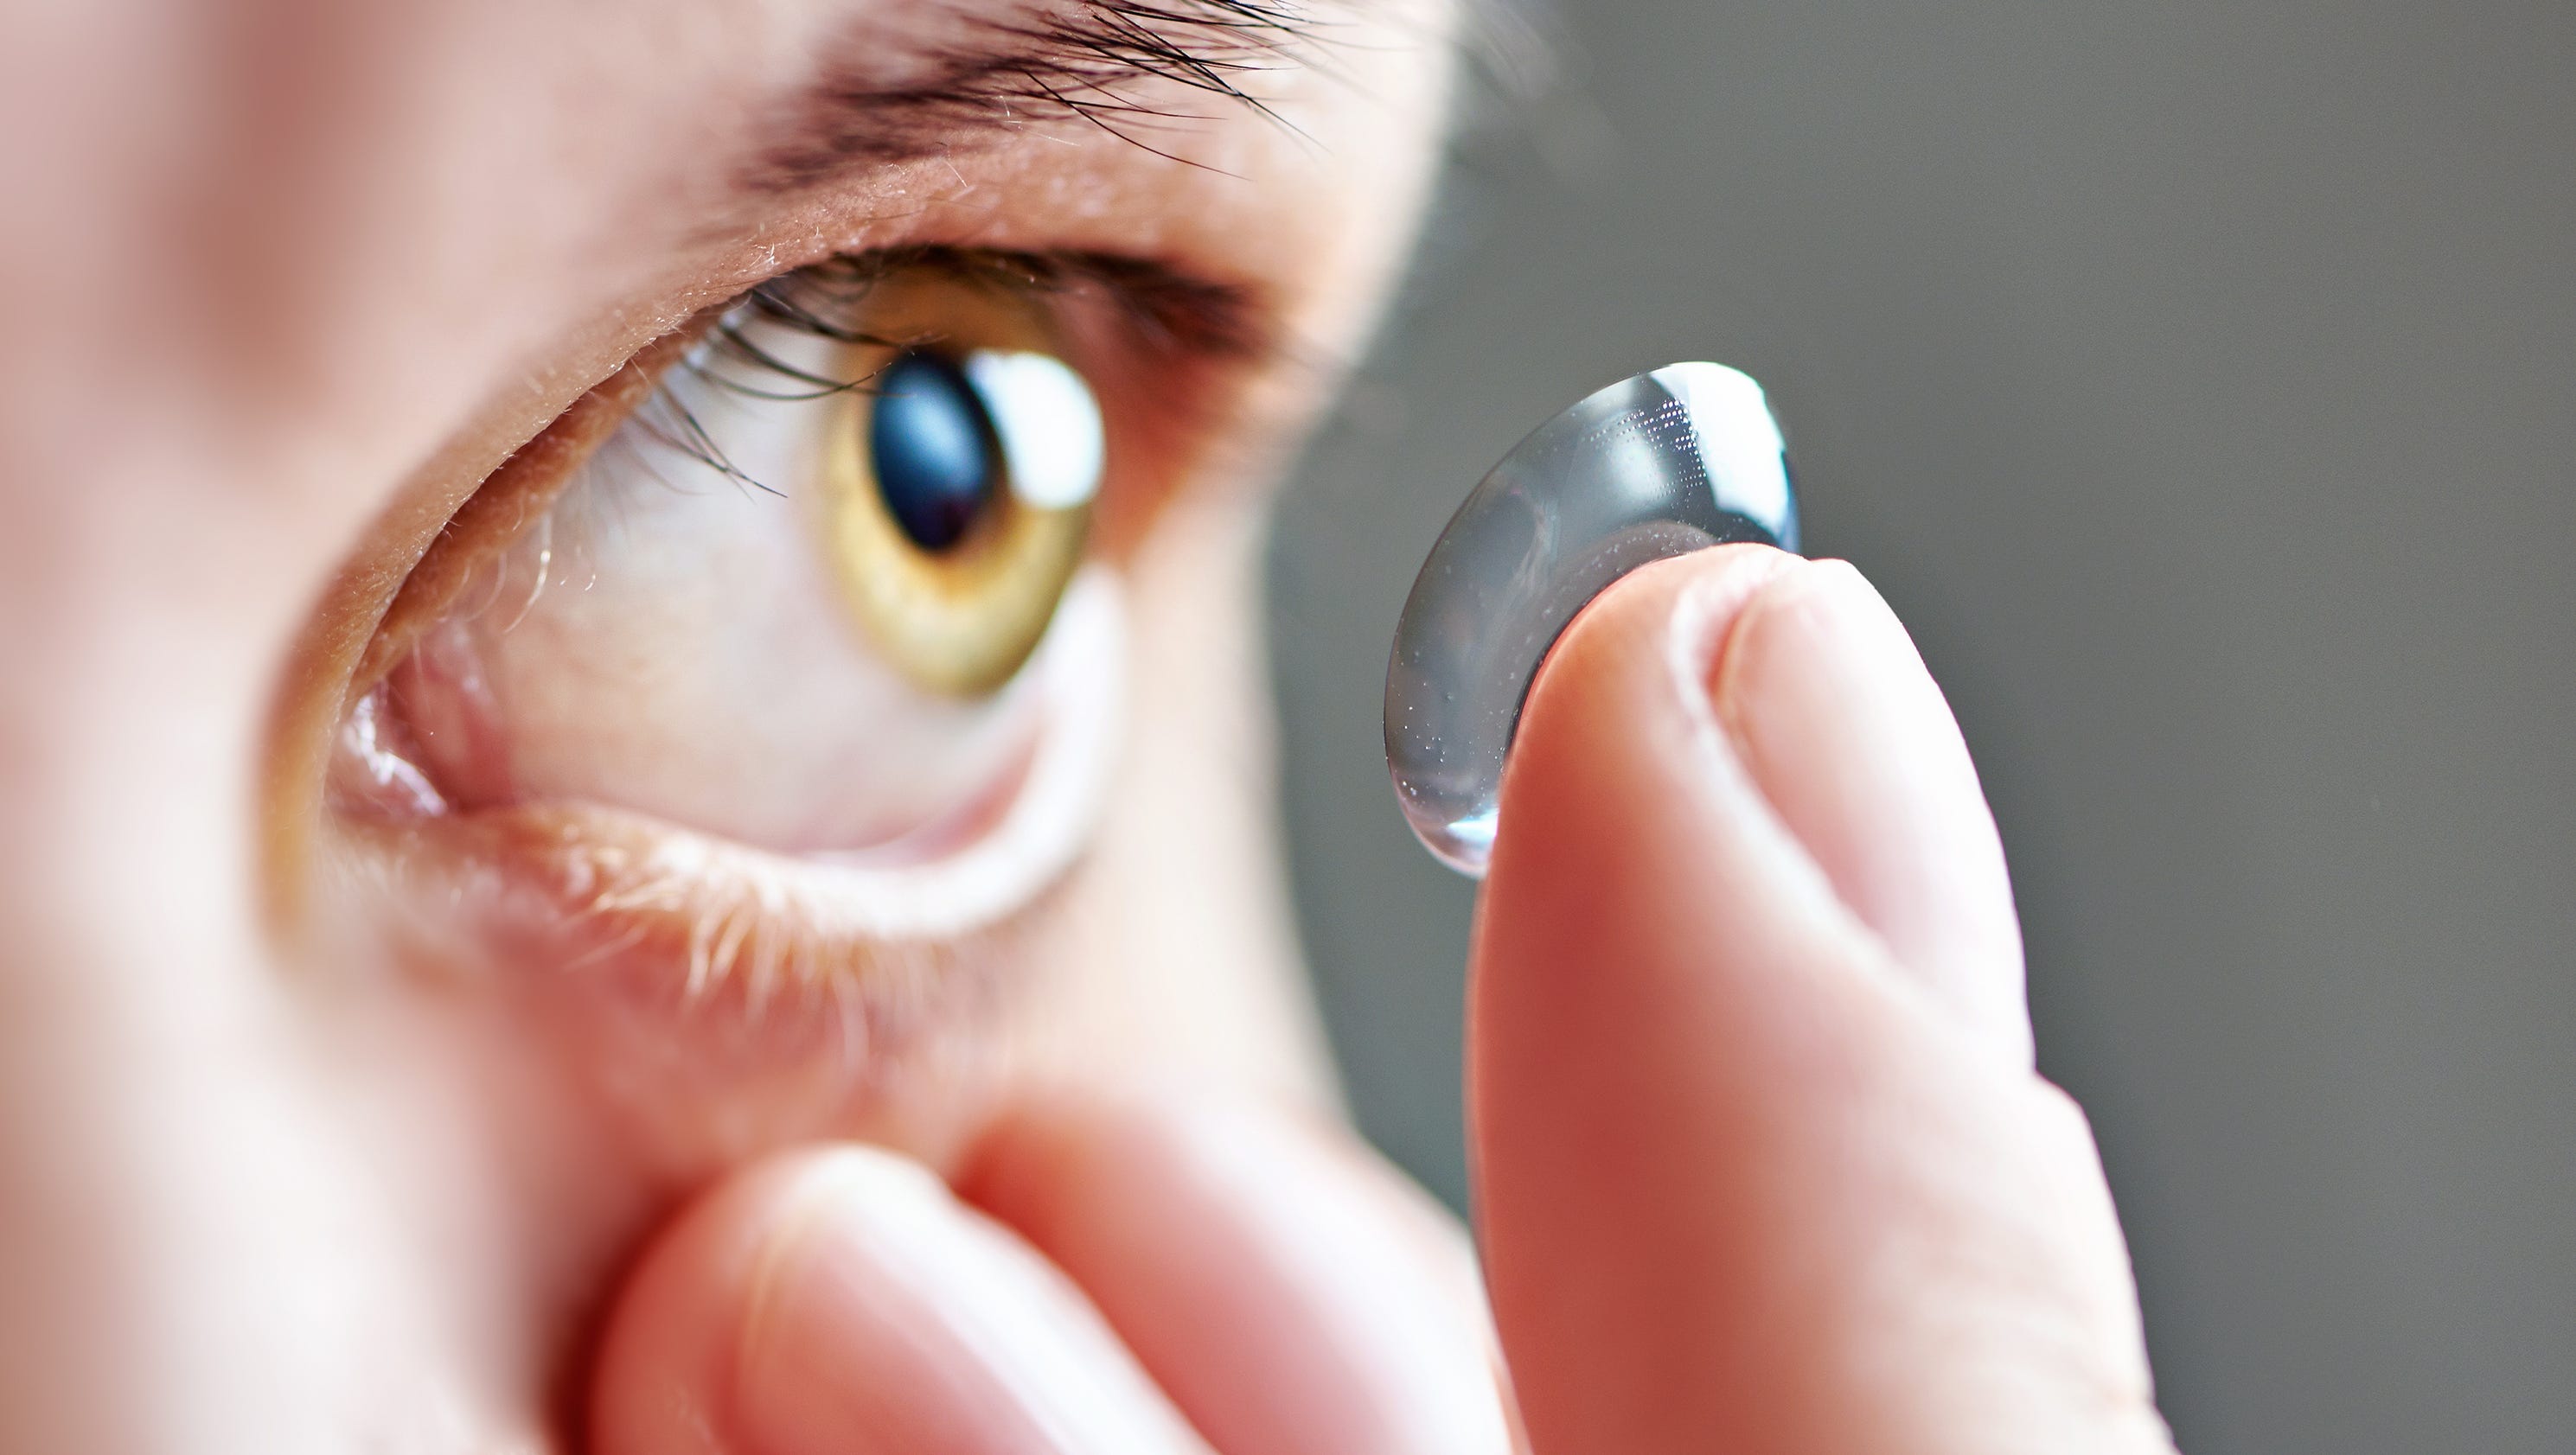 Doctors Find 27 Contact Lenses Lodged In Womans Eye Journal Reports 